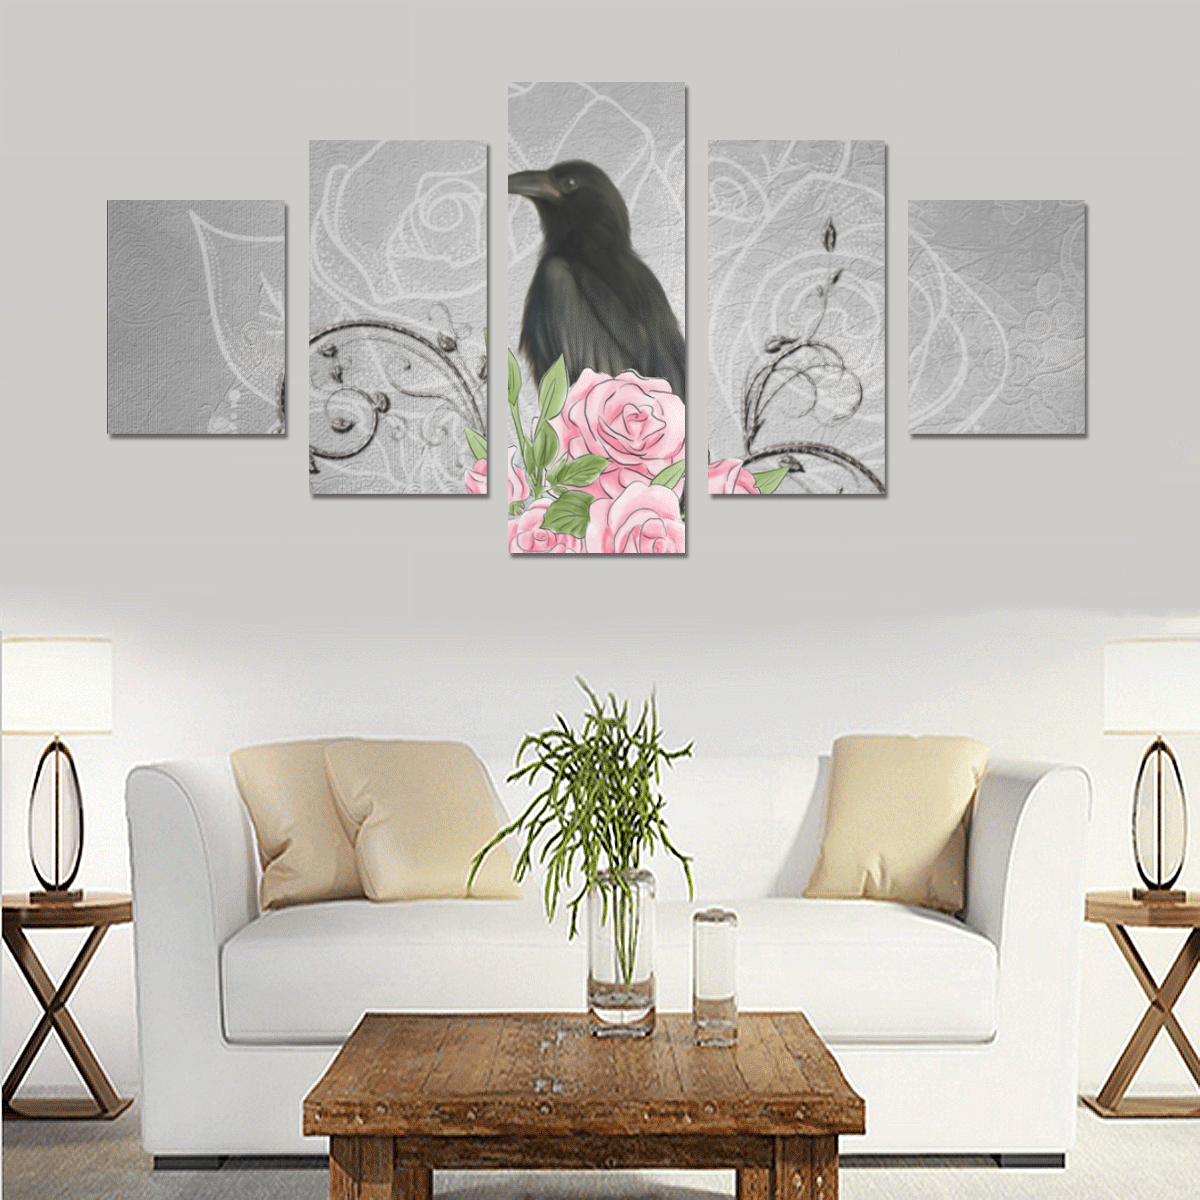 The crow with roses Canvas Print Sets B (No Frame)